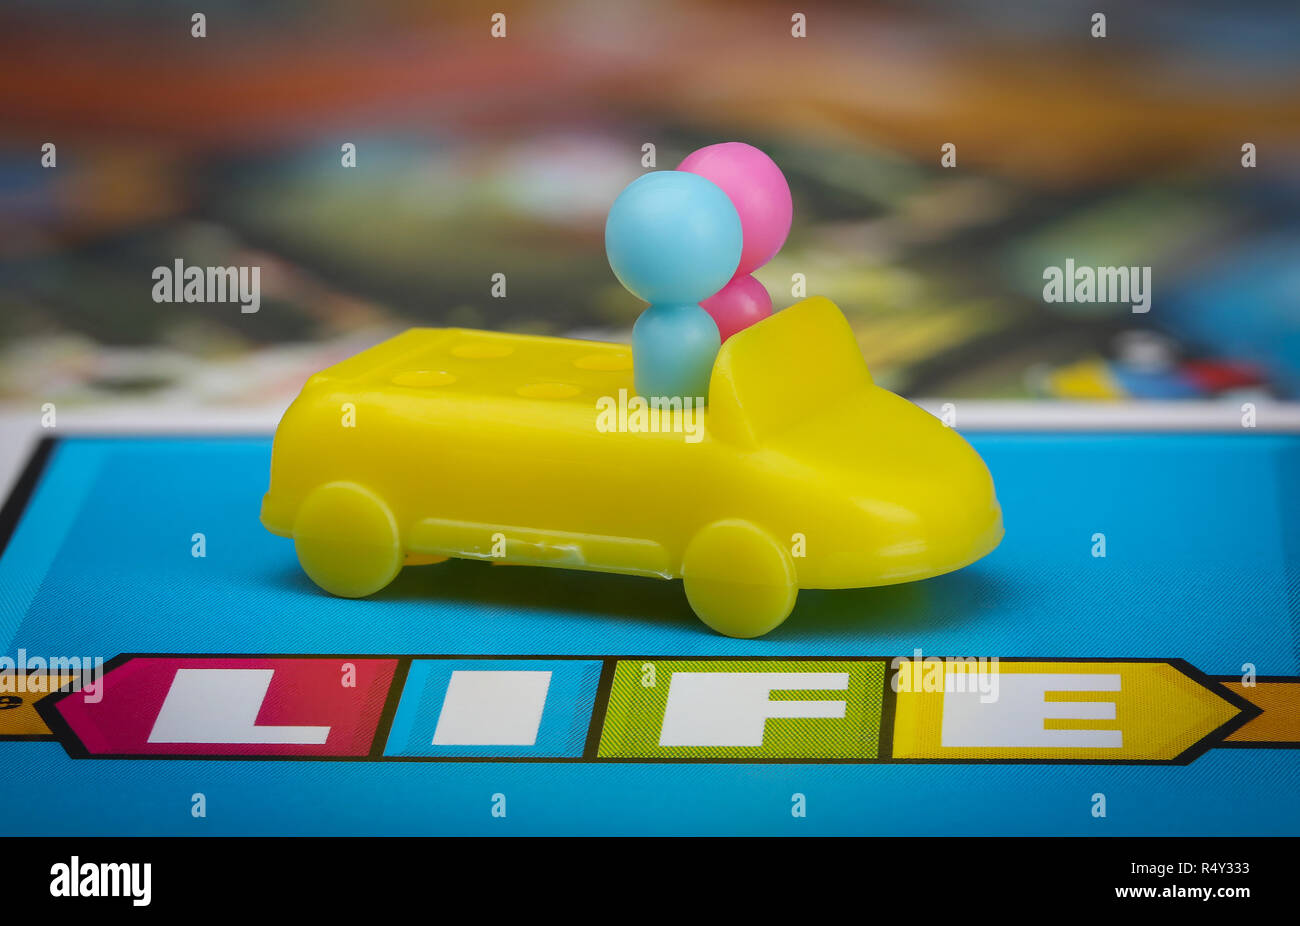 Game of Life board game Stock Photo